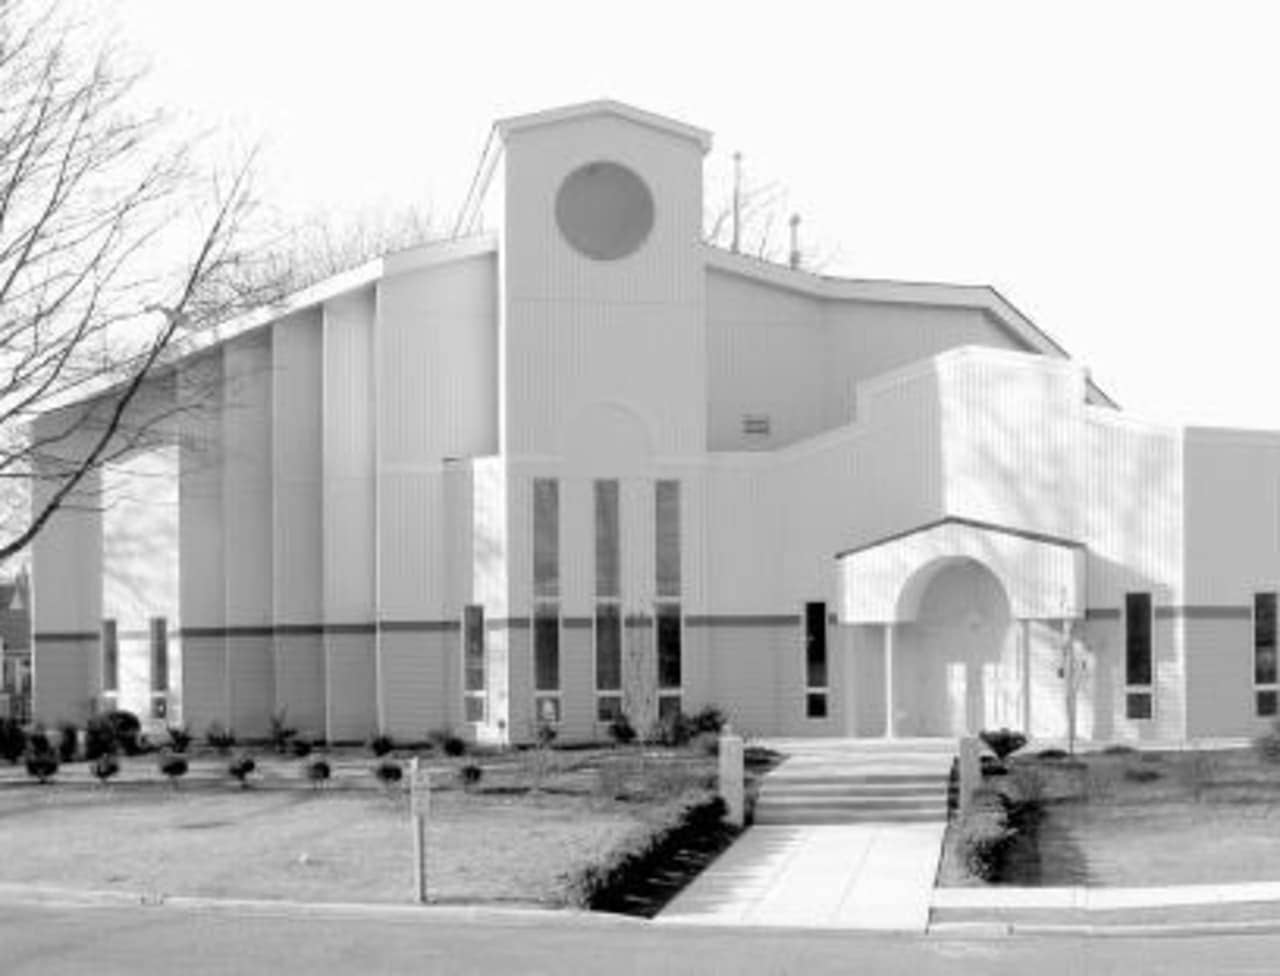 Congregation Beth Abraham  is located in Bergenfield.